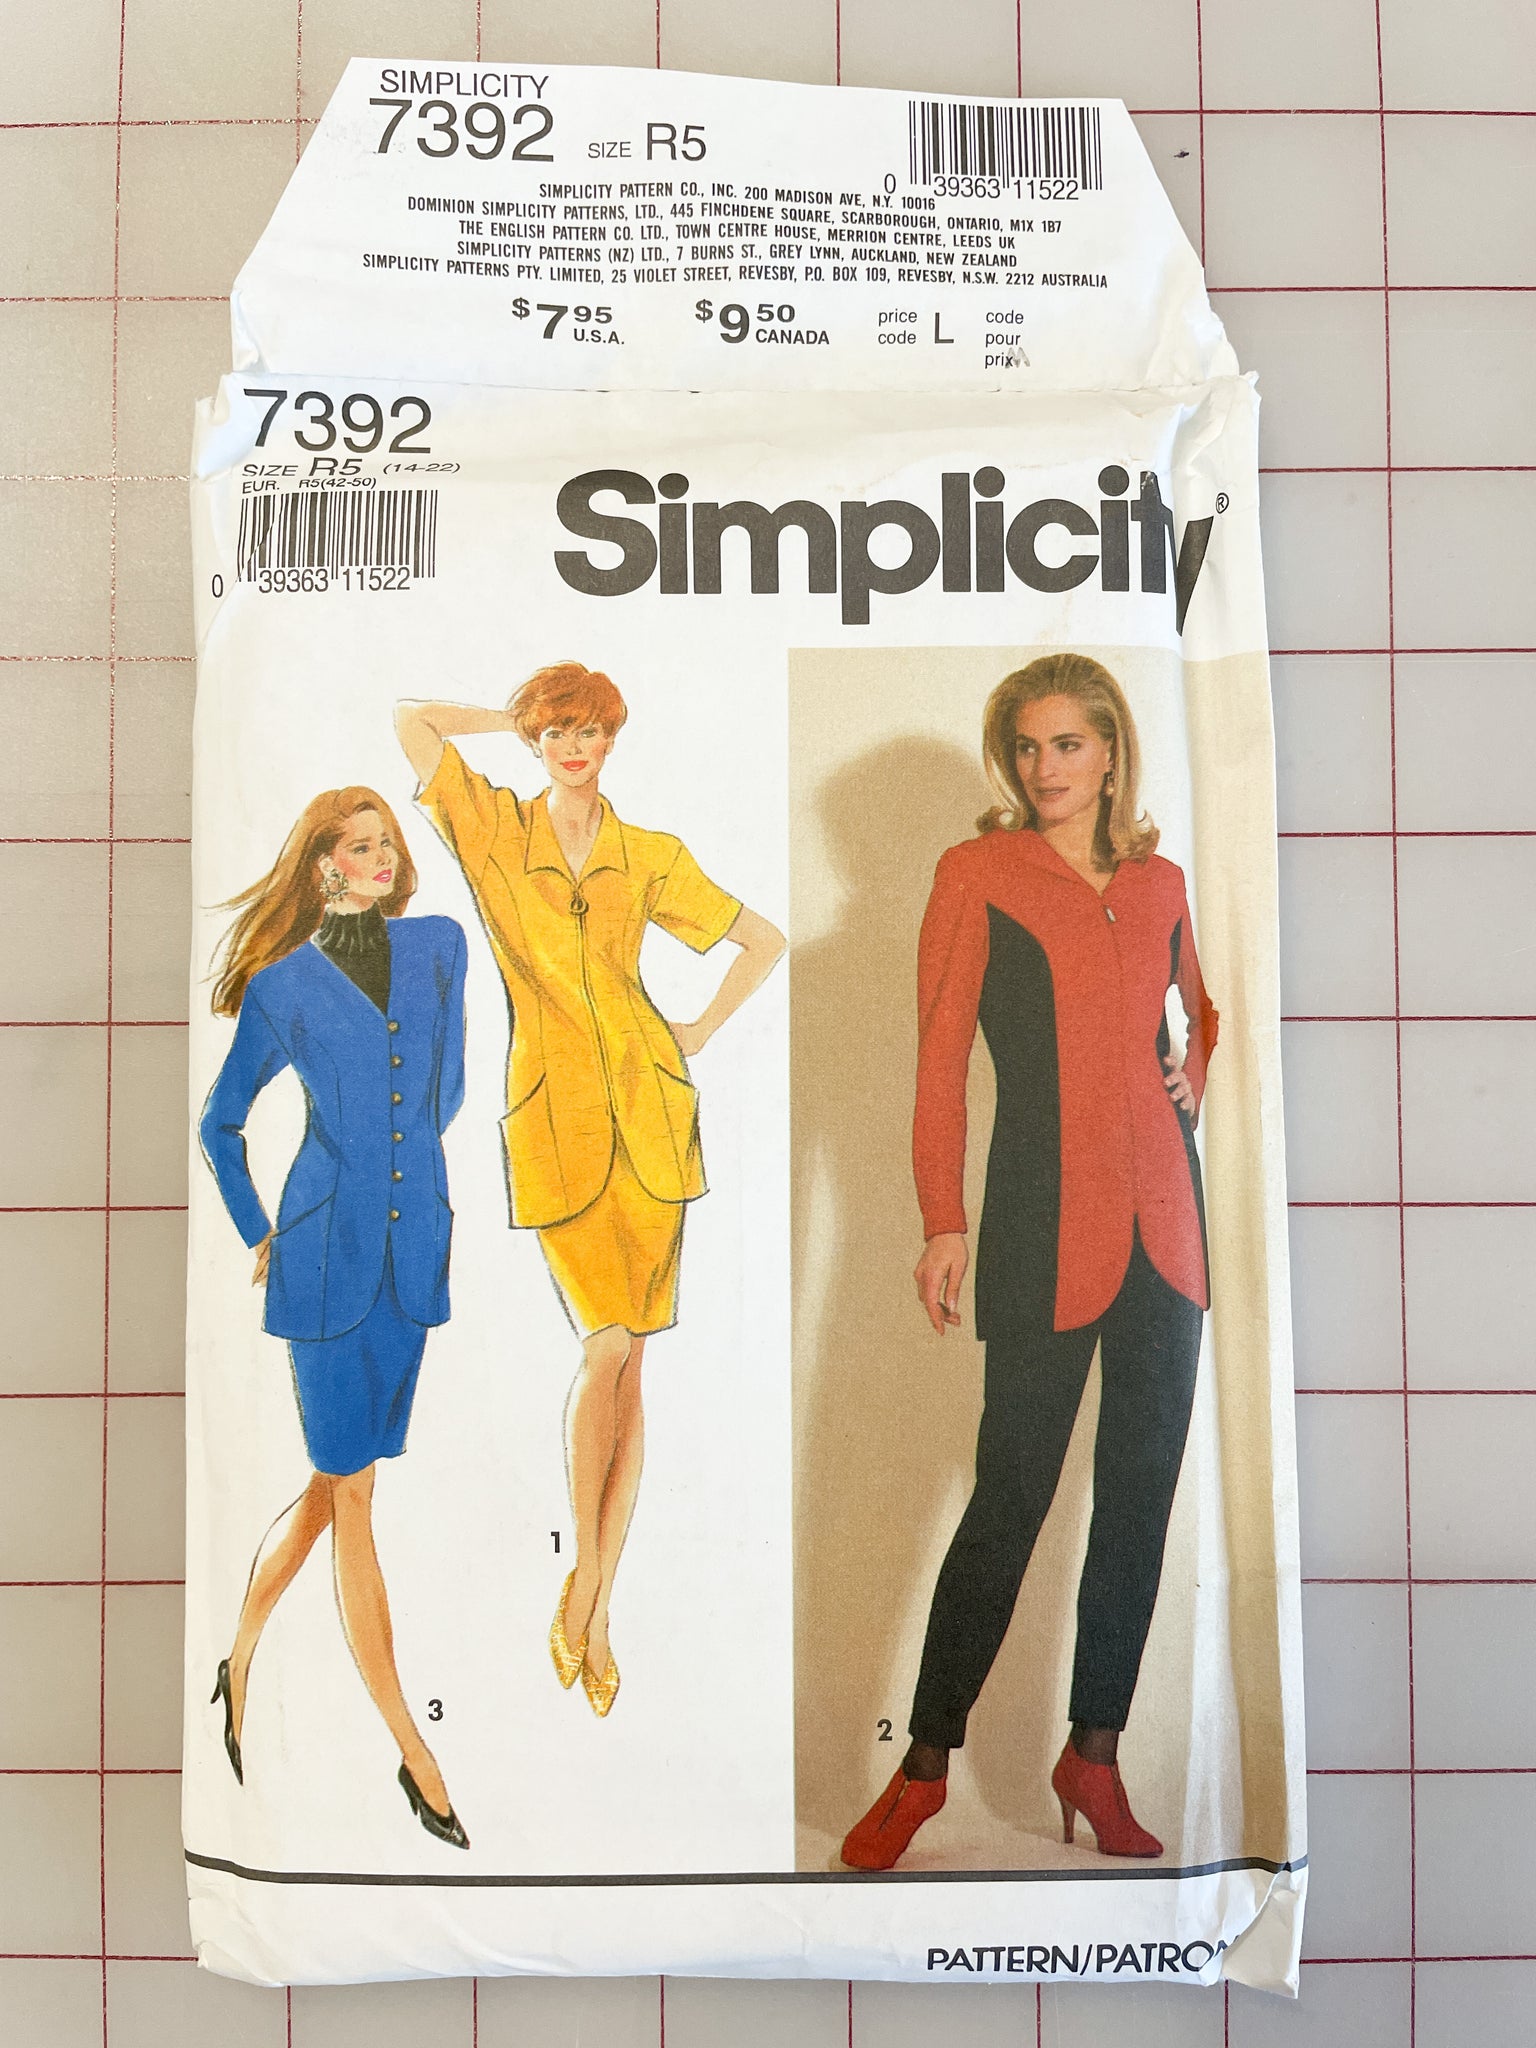 SALE 1991 Simplicity 7392 Pattern - Jacket, Skirt and Pants FACTORY FOLDED